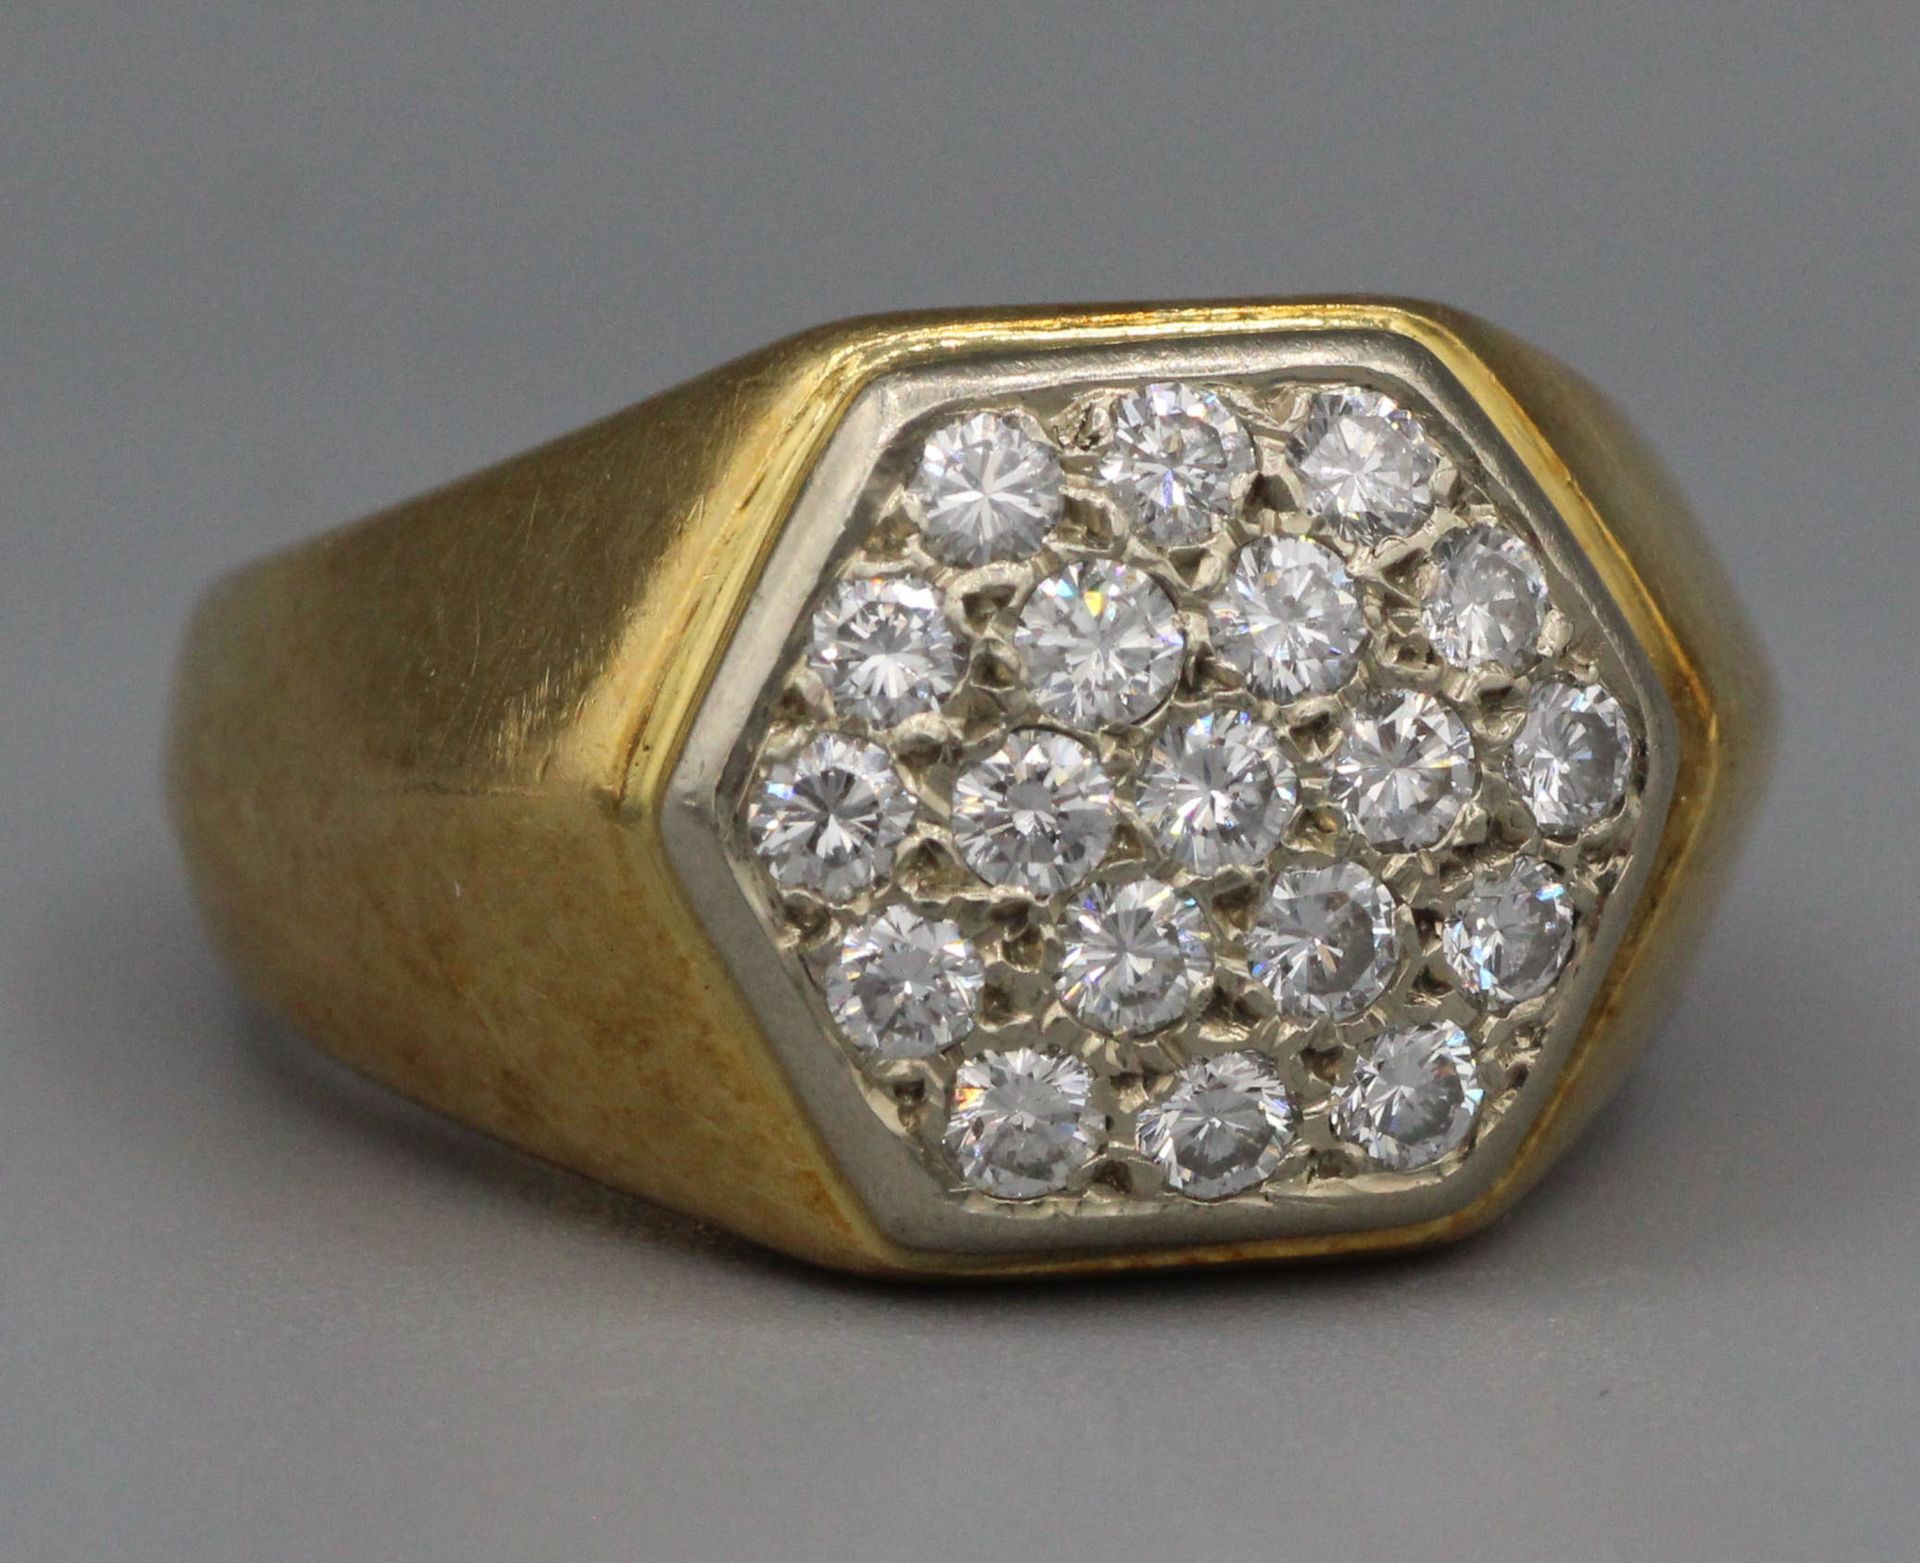 Null Hexagonal geometrical gold ring paved with diamonds - Gross weight: 10.3 g